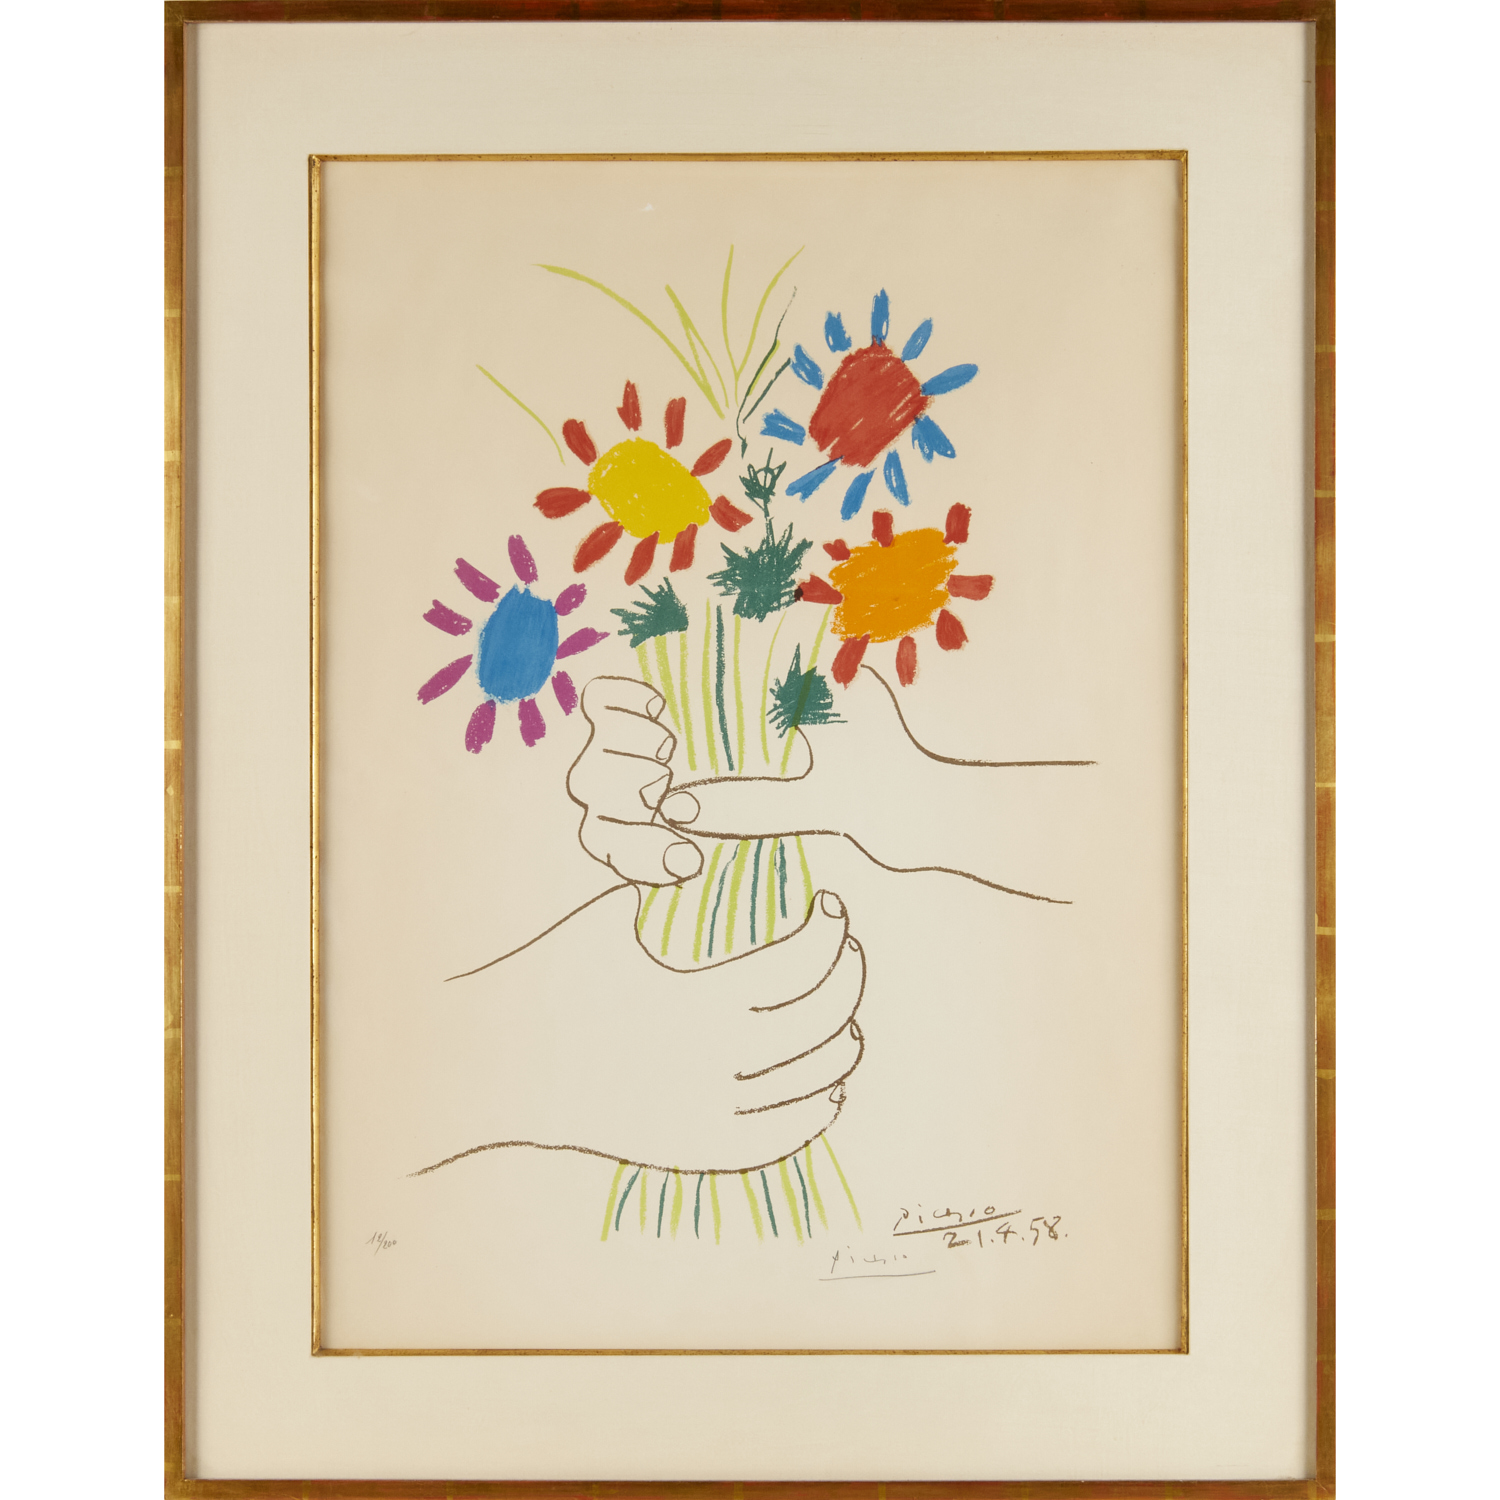 PABLO PICASSO, SIGNED LITHOGRAPH,